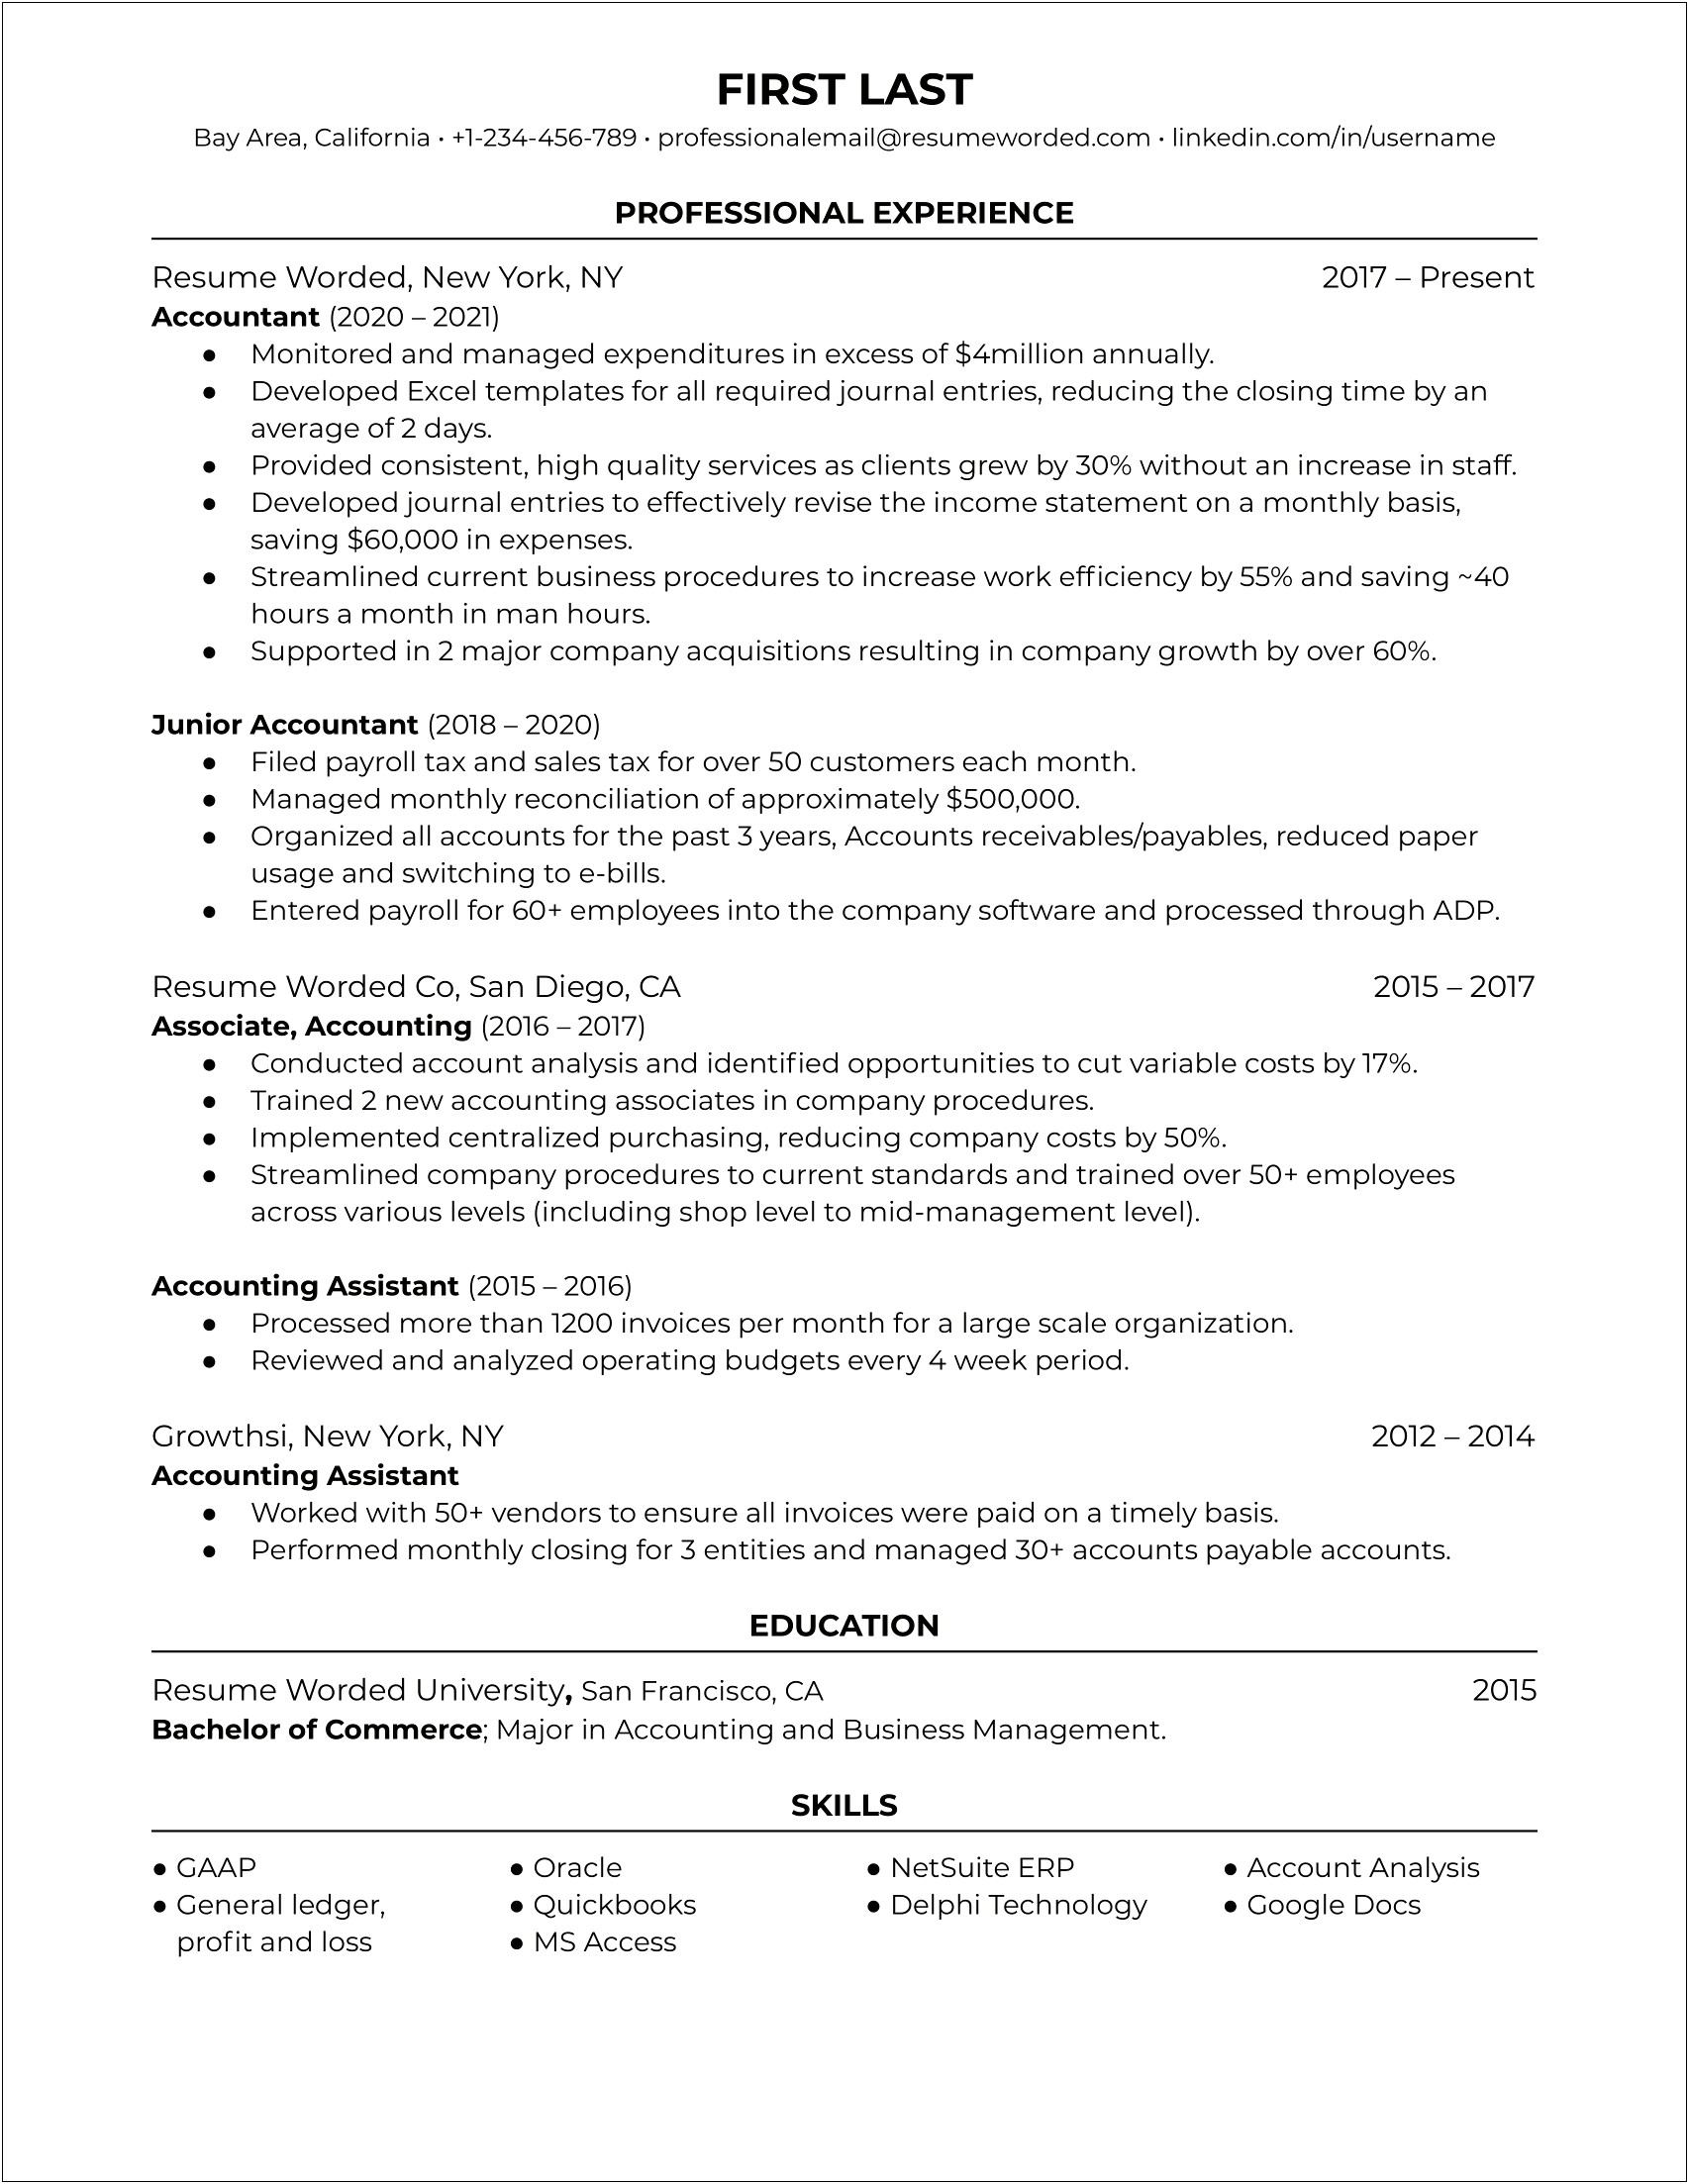 Resume For Accountant With Tax Experience And Payroll